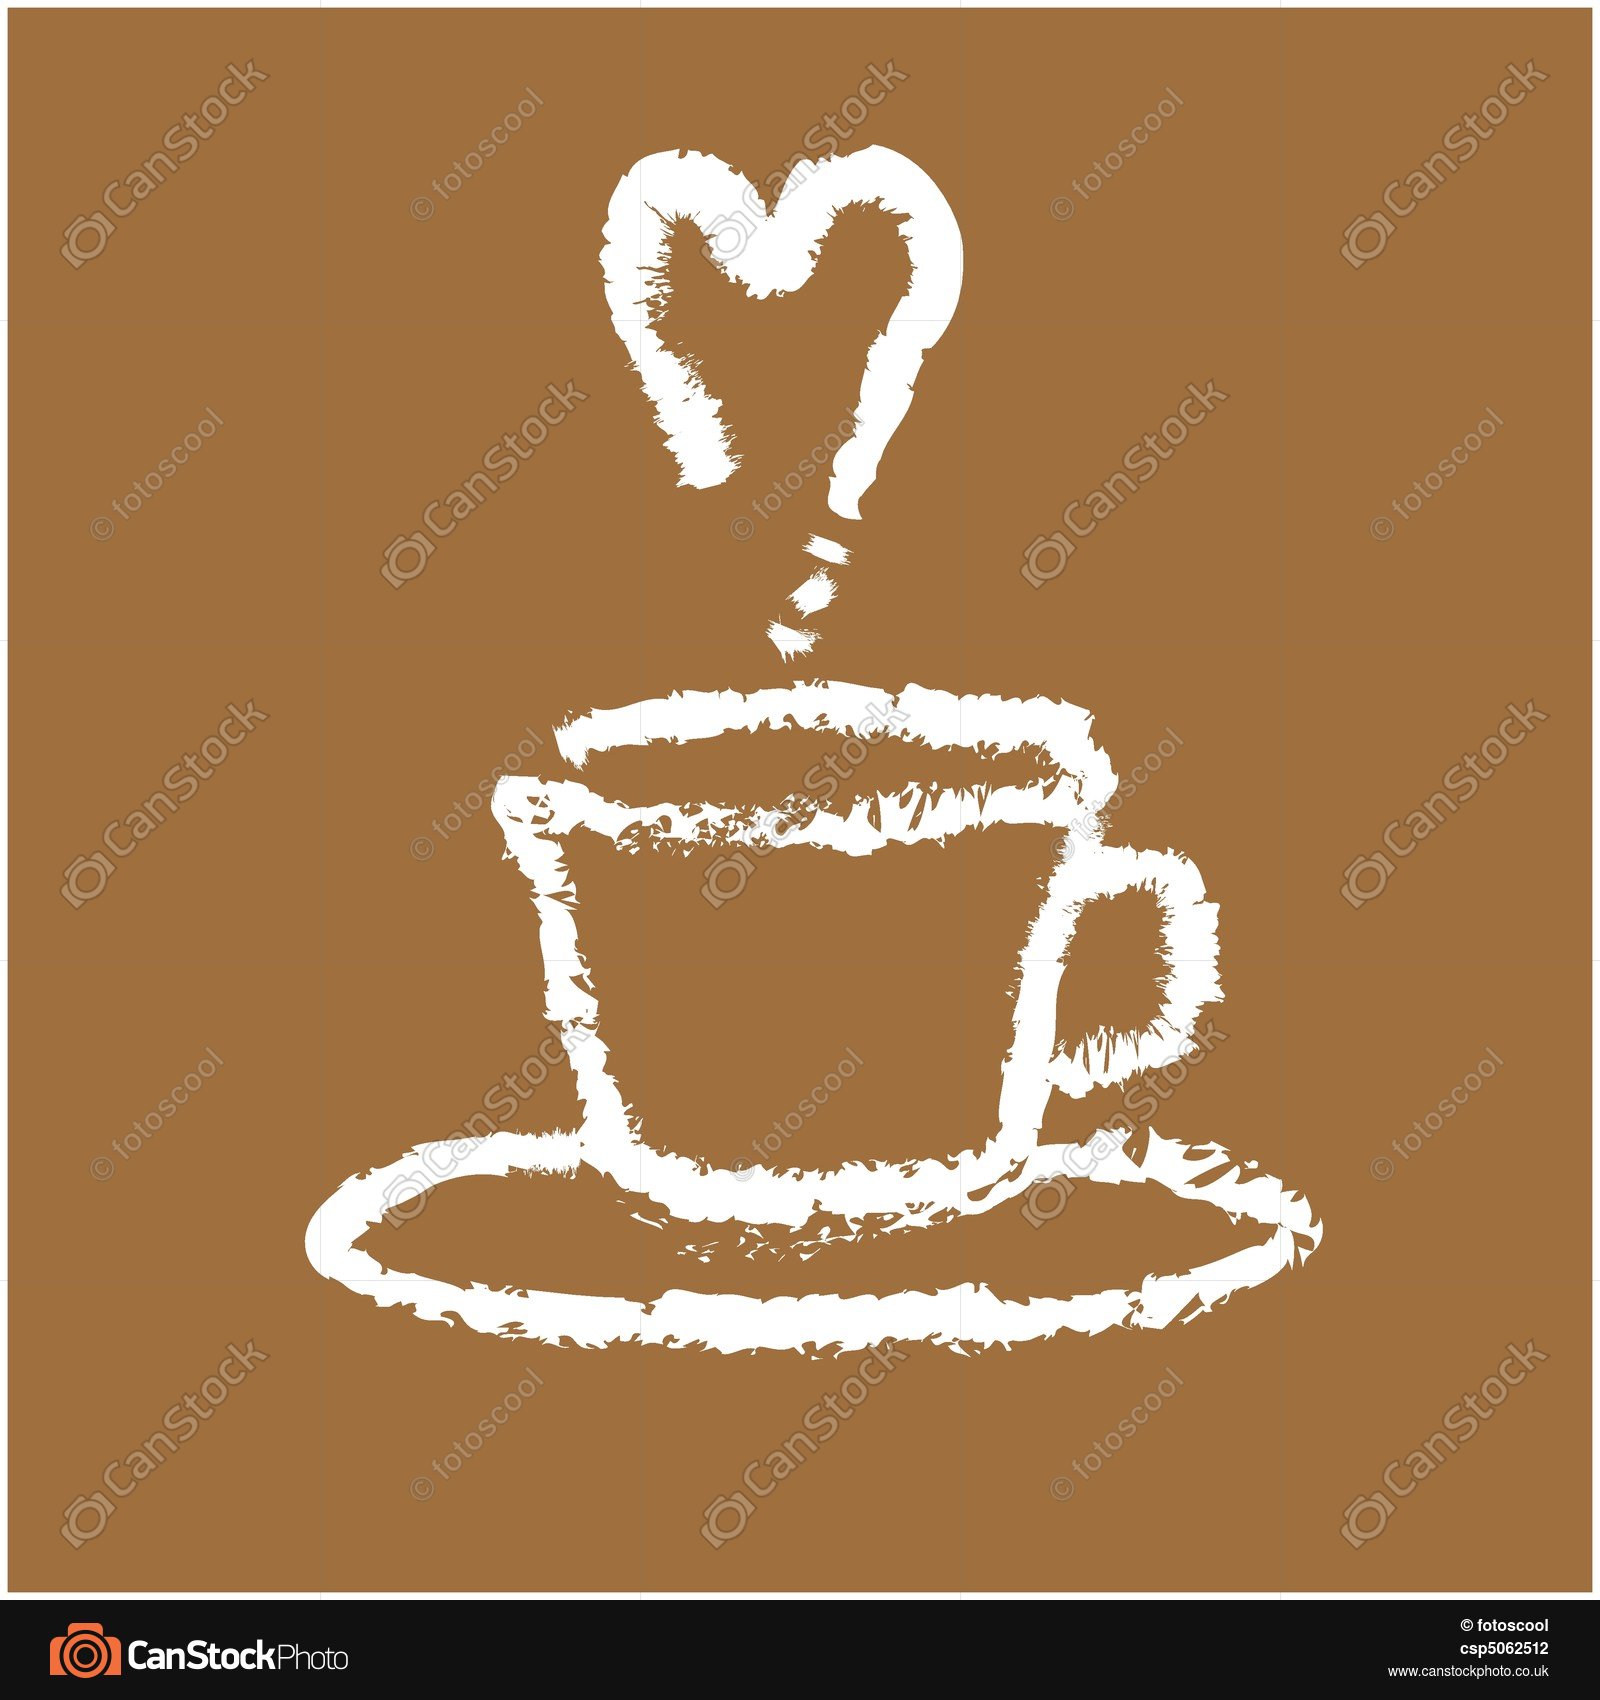 Abstract cup of coffee vector illustration - Search Clipart ...